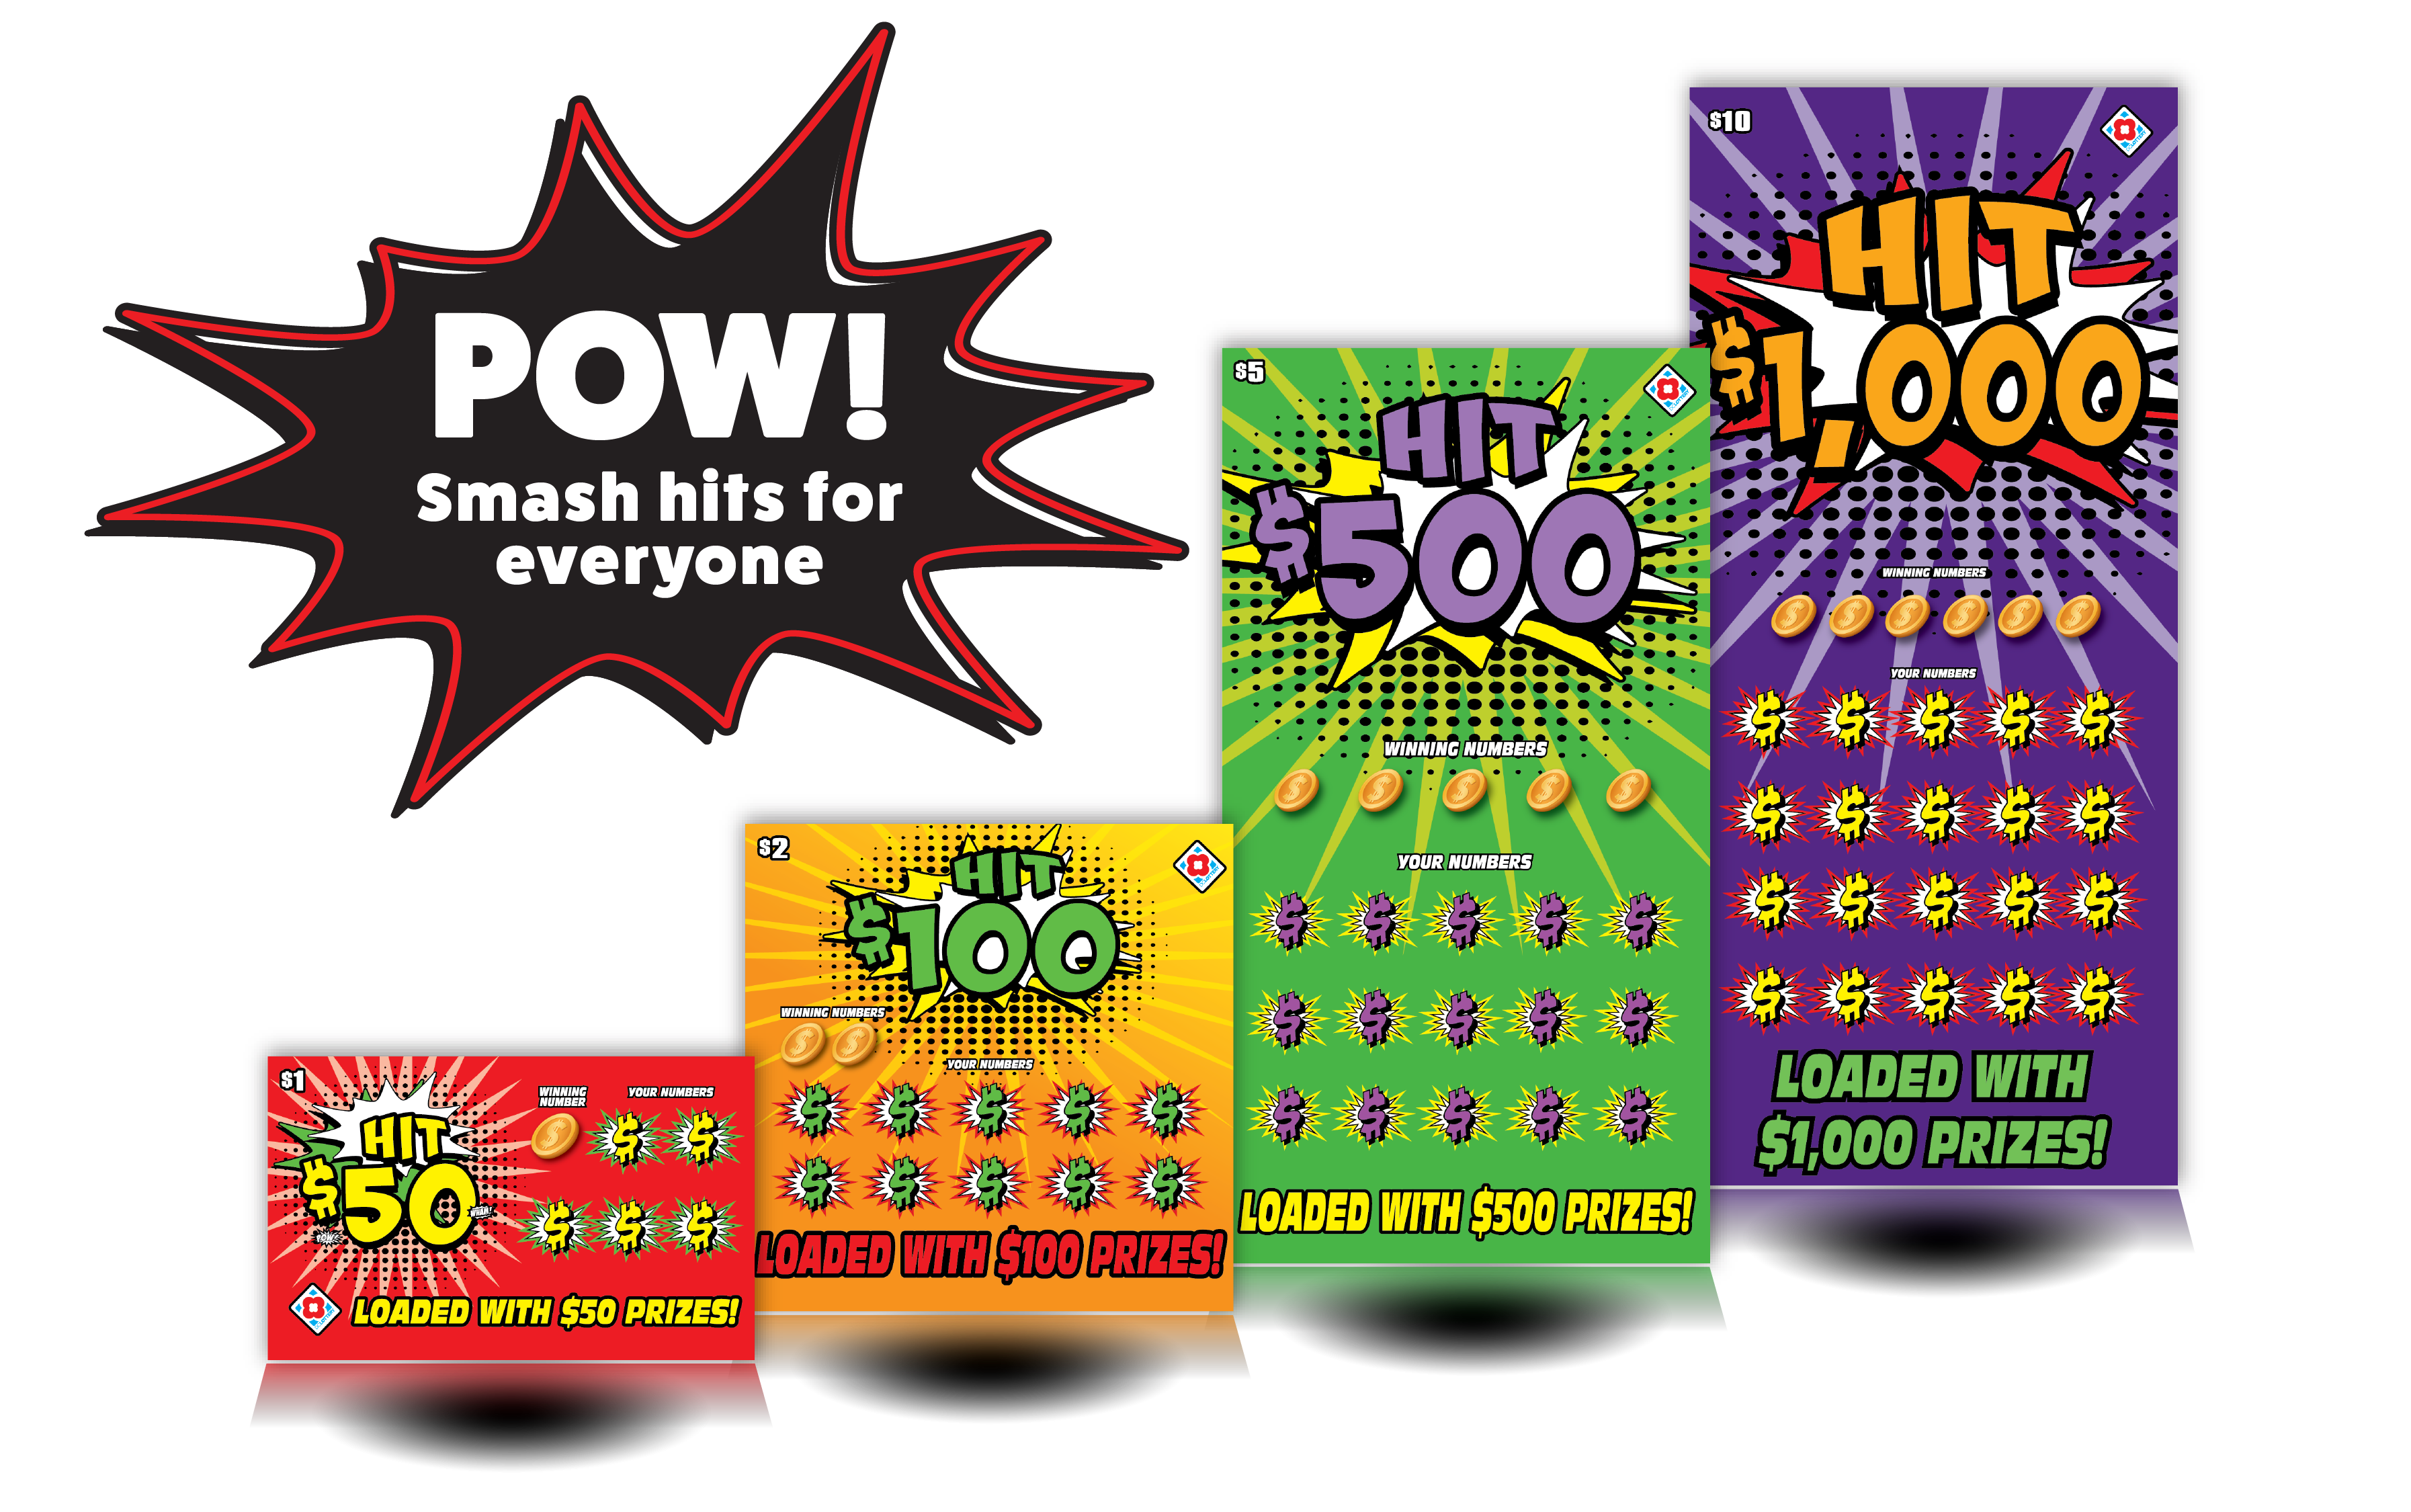 set of HIT lottery scratchers in various colors